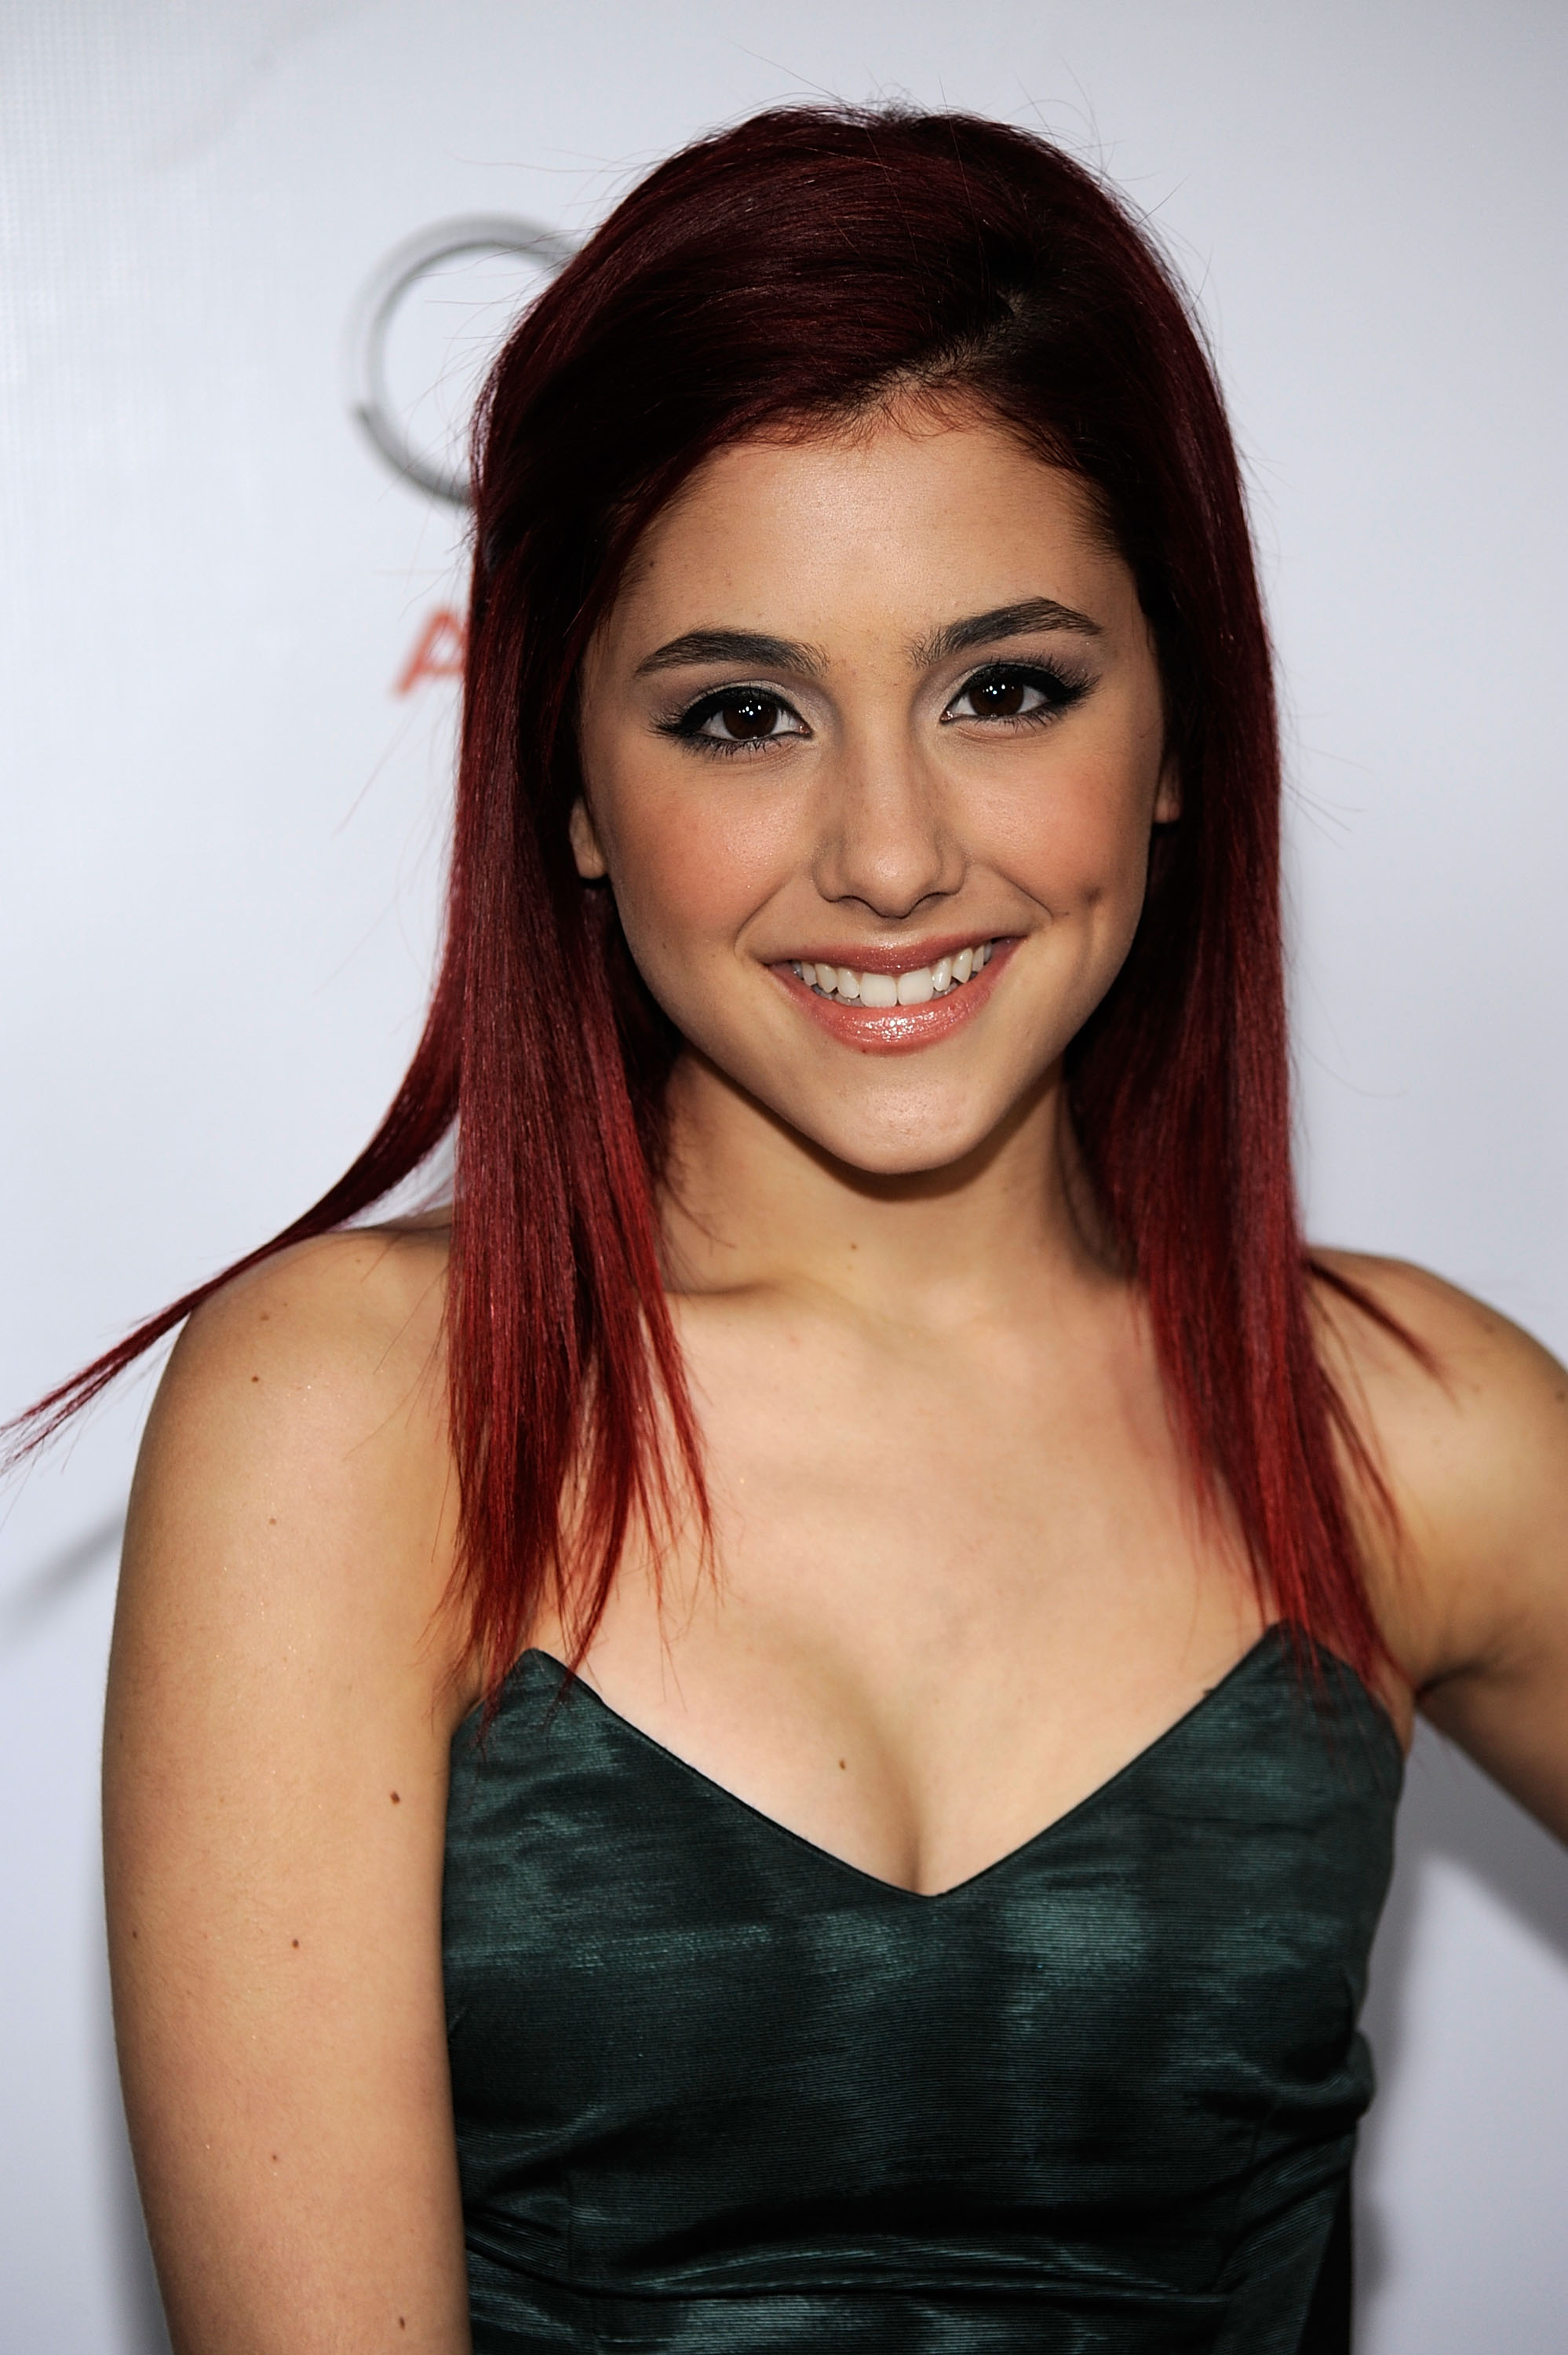 Ariana Grande Looks Gorgeous With Natural Curly Hair